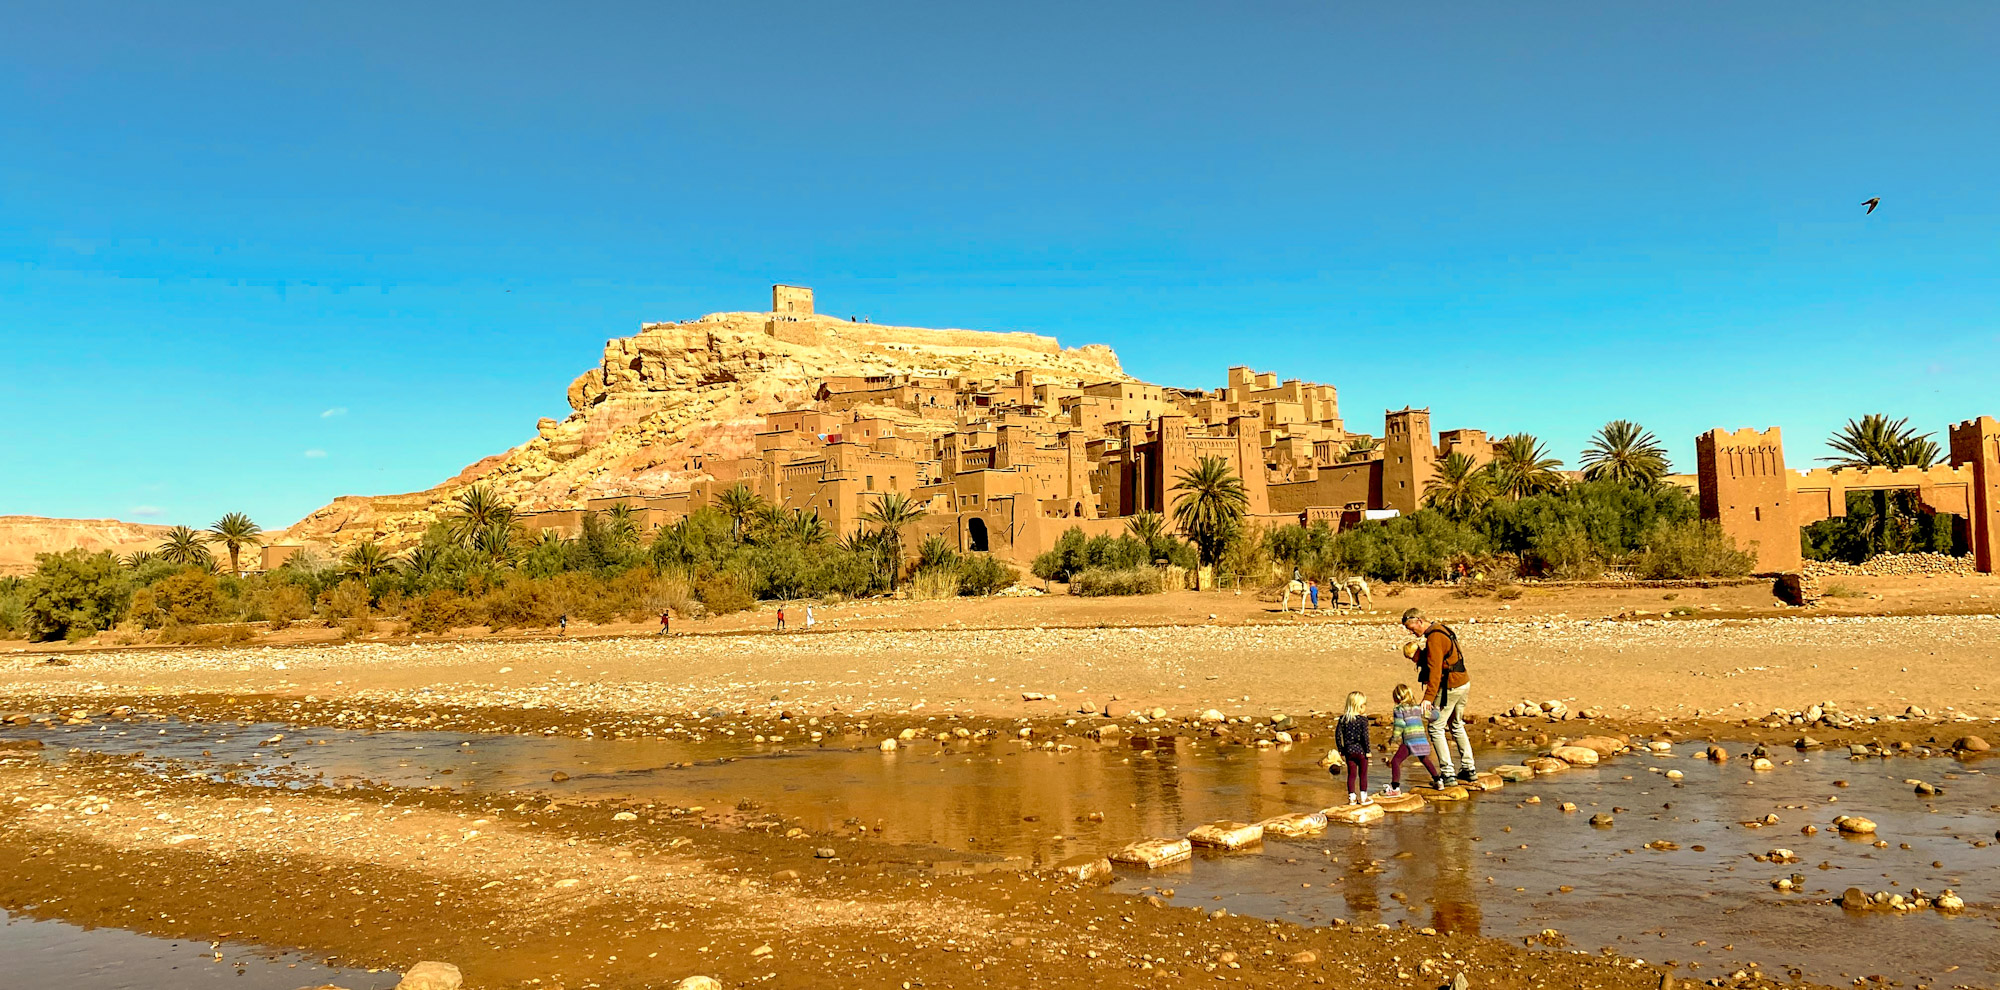 Crossing river stepping stones to Ait Benhaddou, Morocco